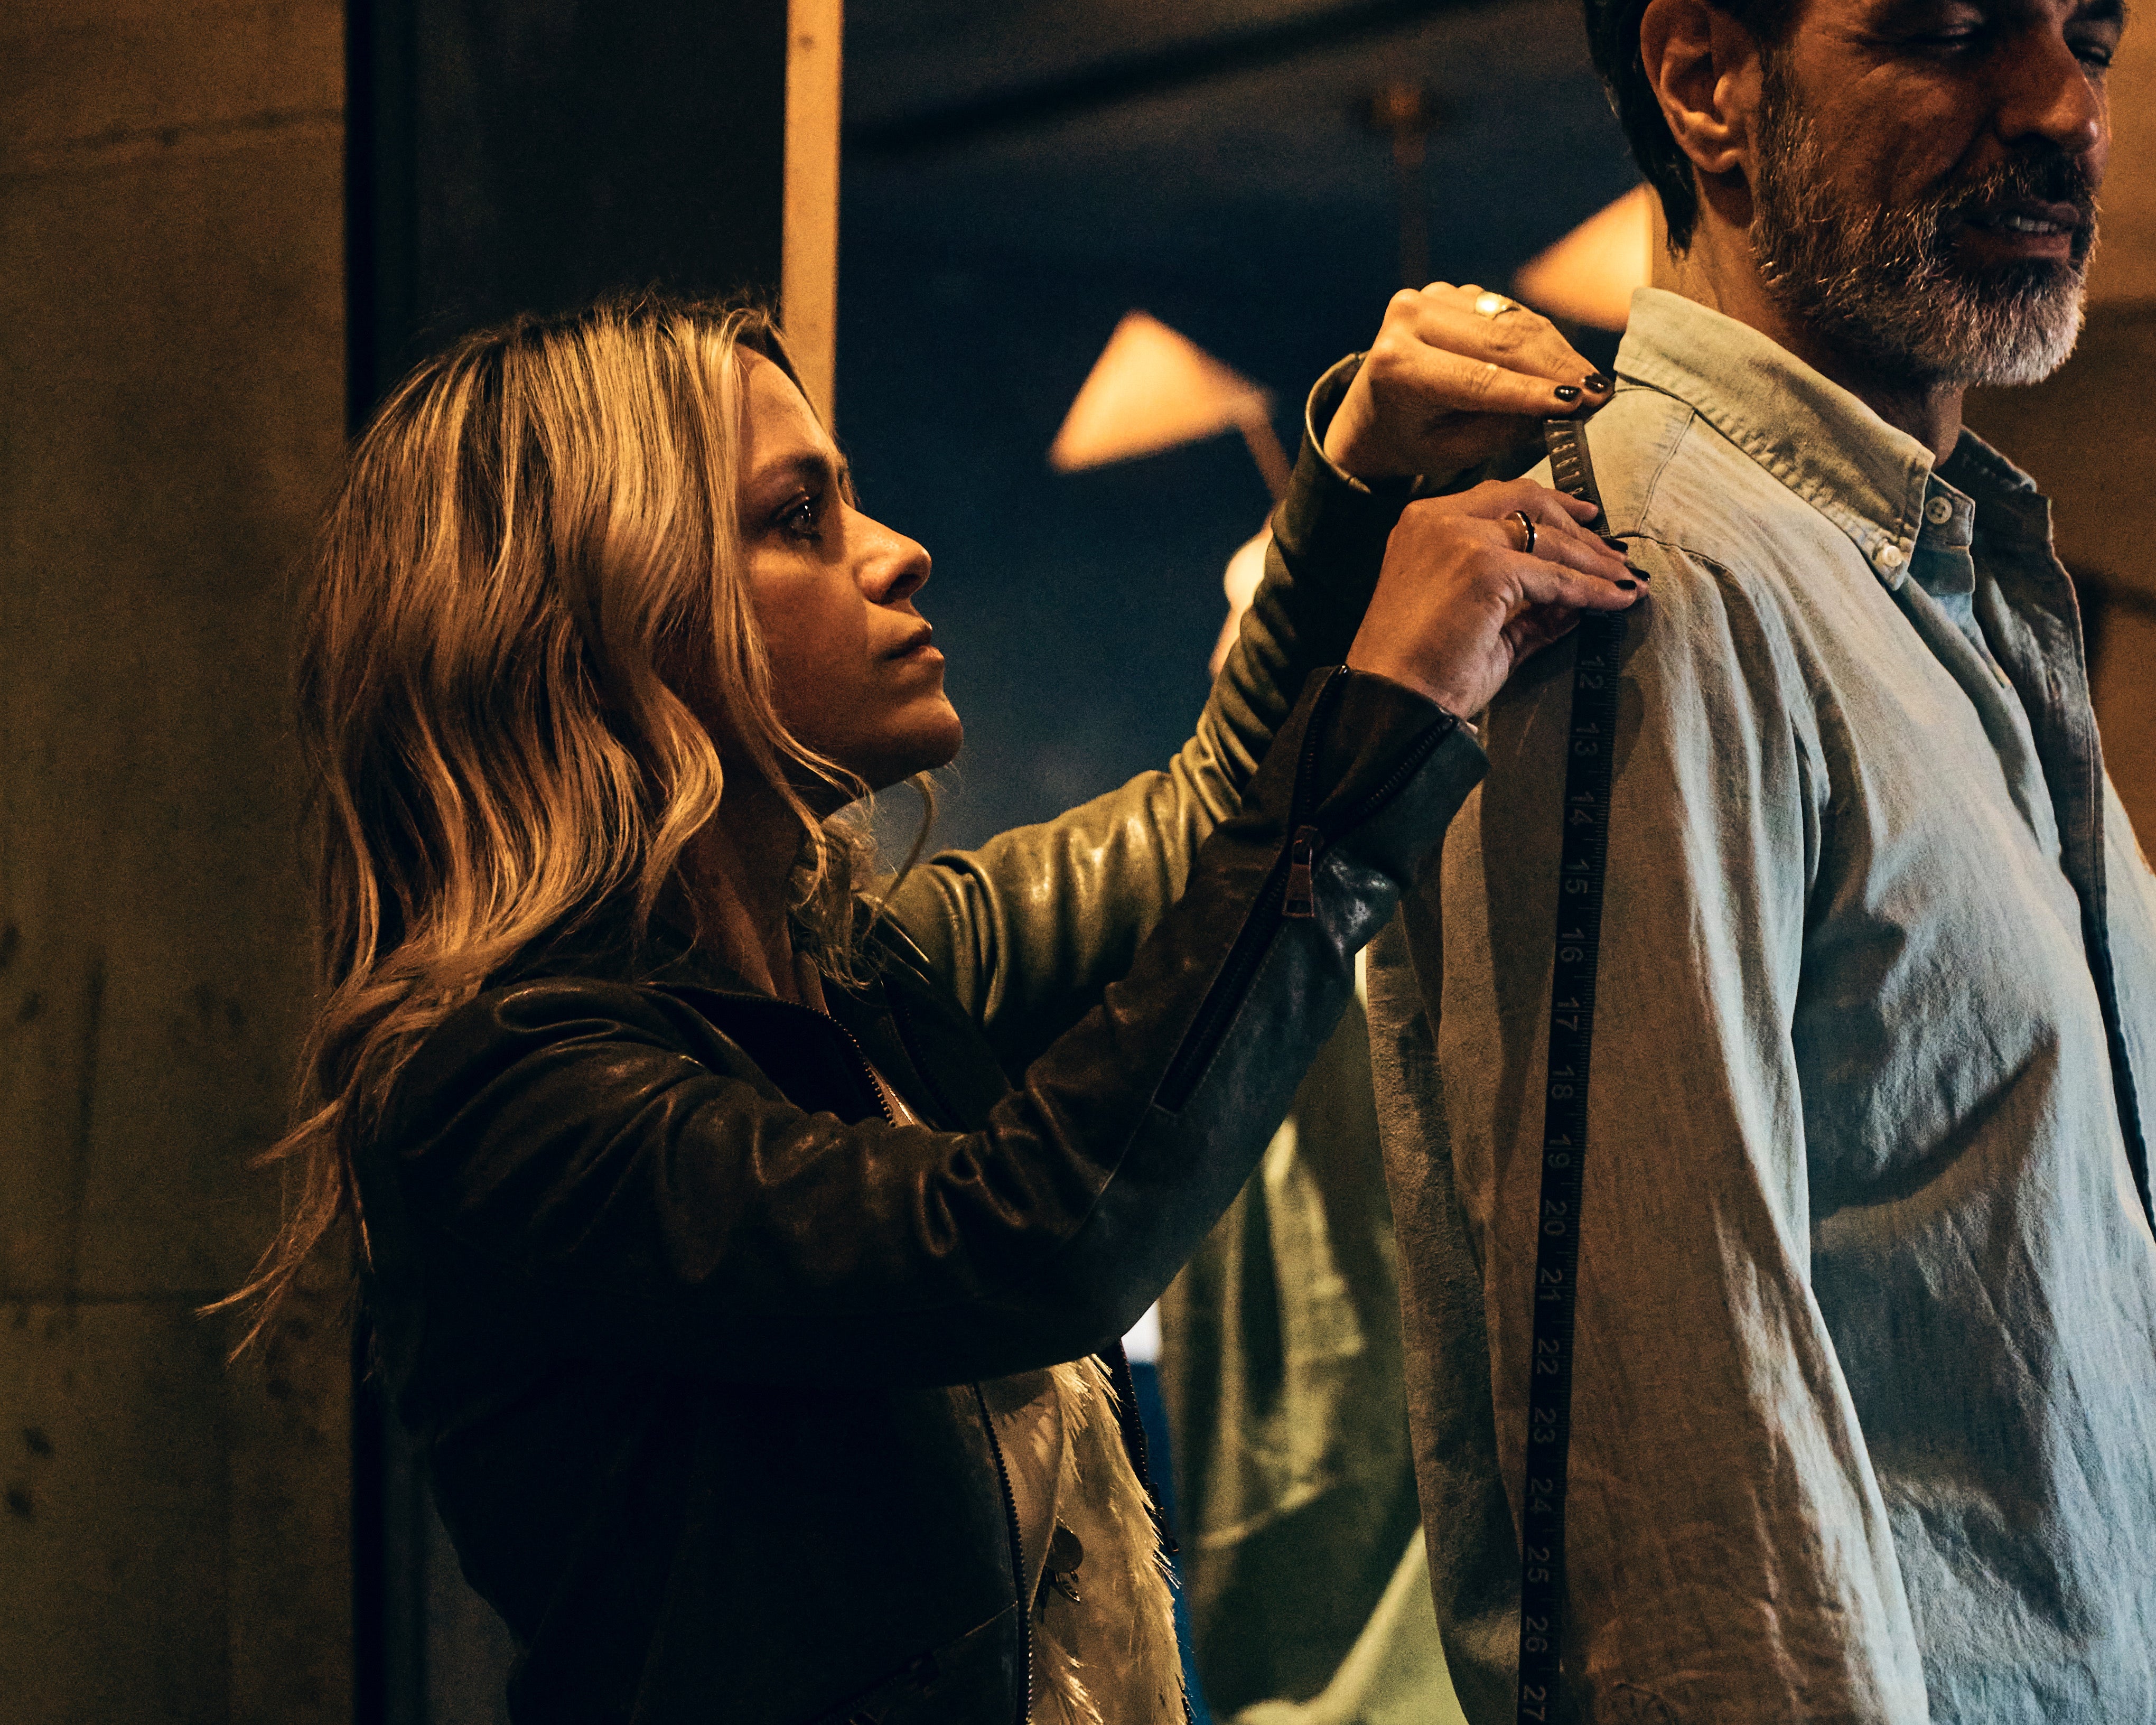 image of Savannah measuring a man's shoulder for fitting a new jacket